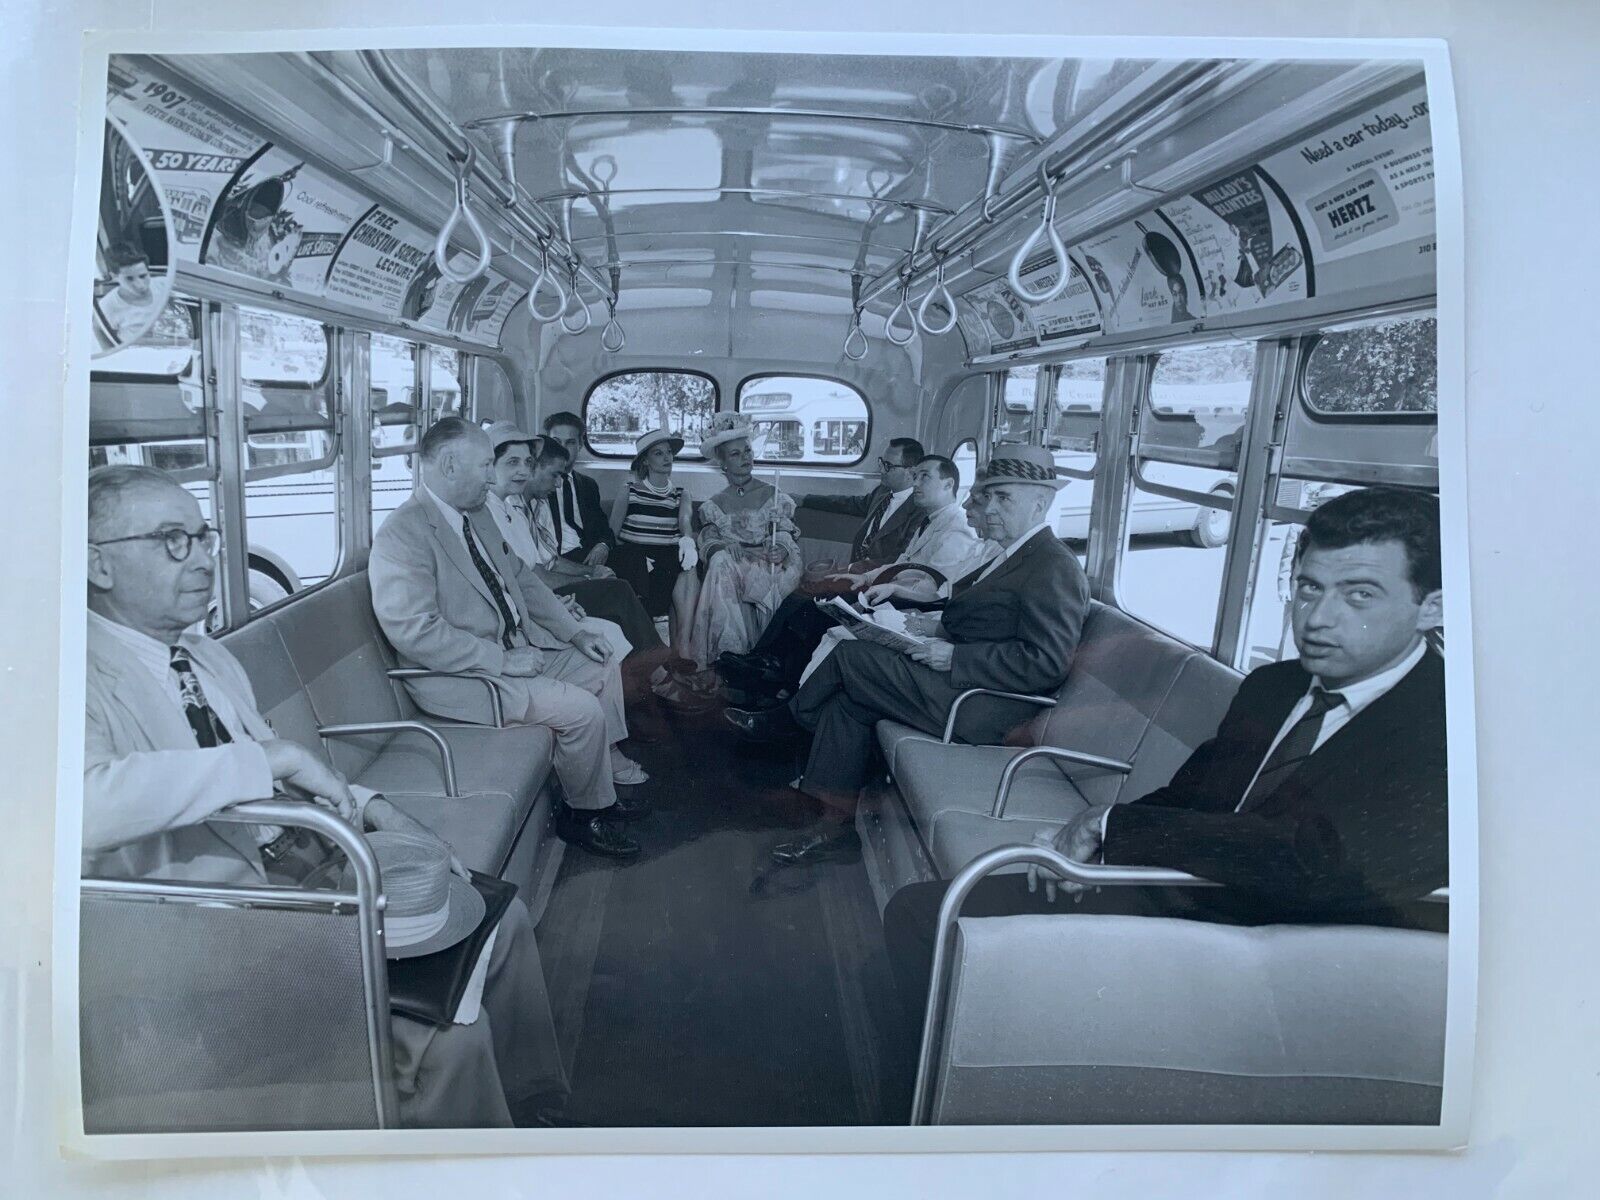 8X10 NY NYC BUS CLASSY WOMEN DRESSED UP BUSINESSMEN NEW BUS TRANSIT PHOTOGRAPH